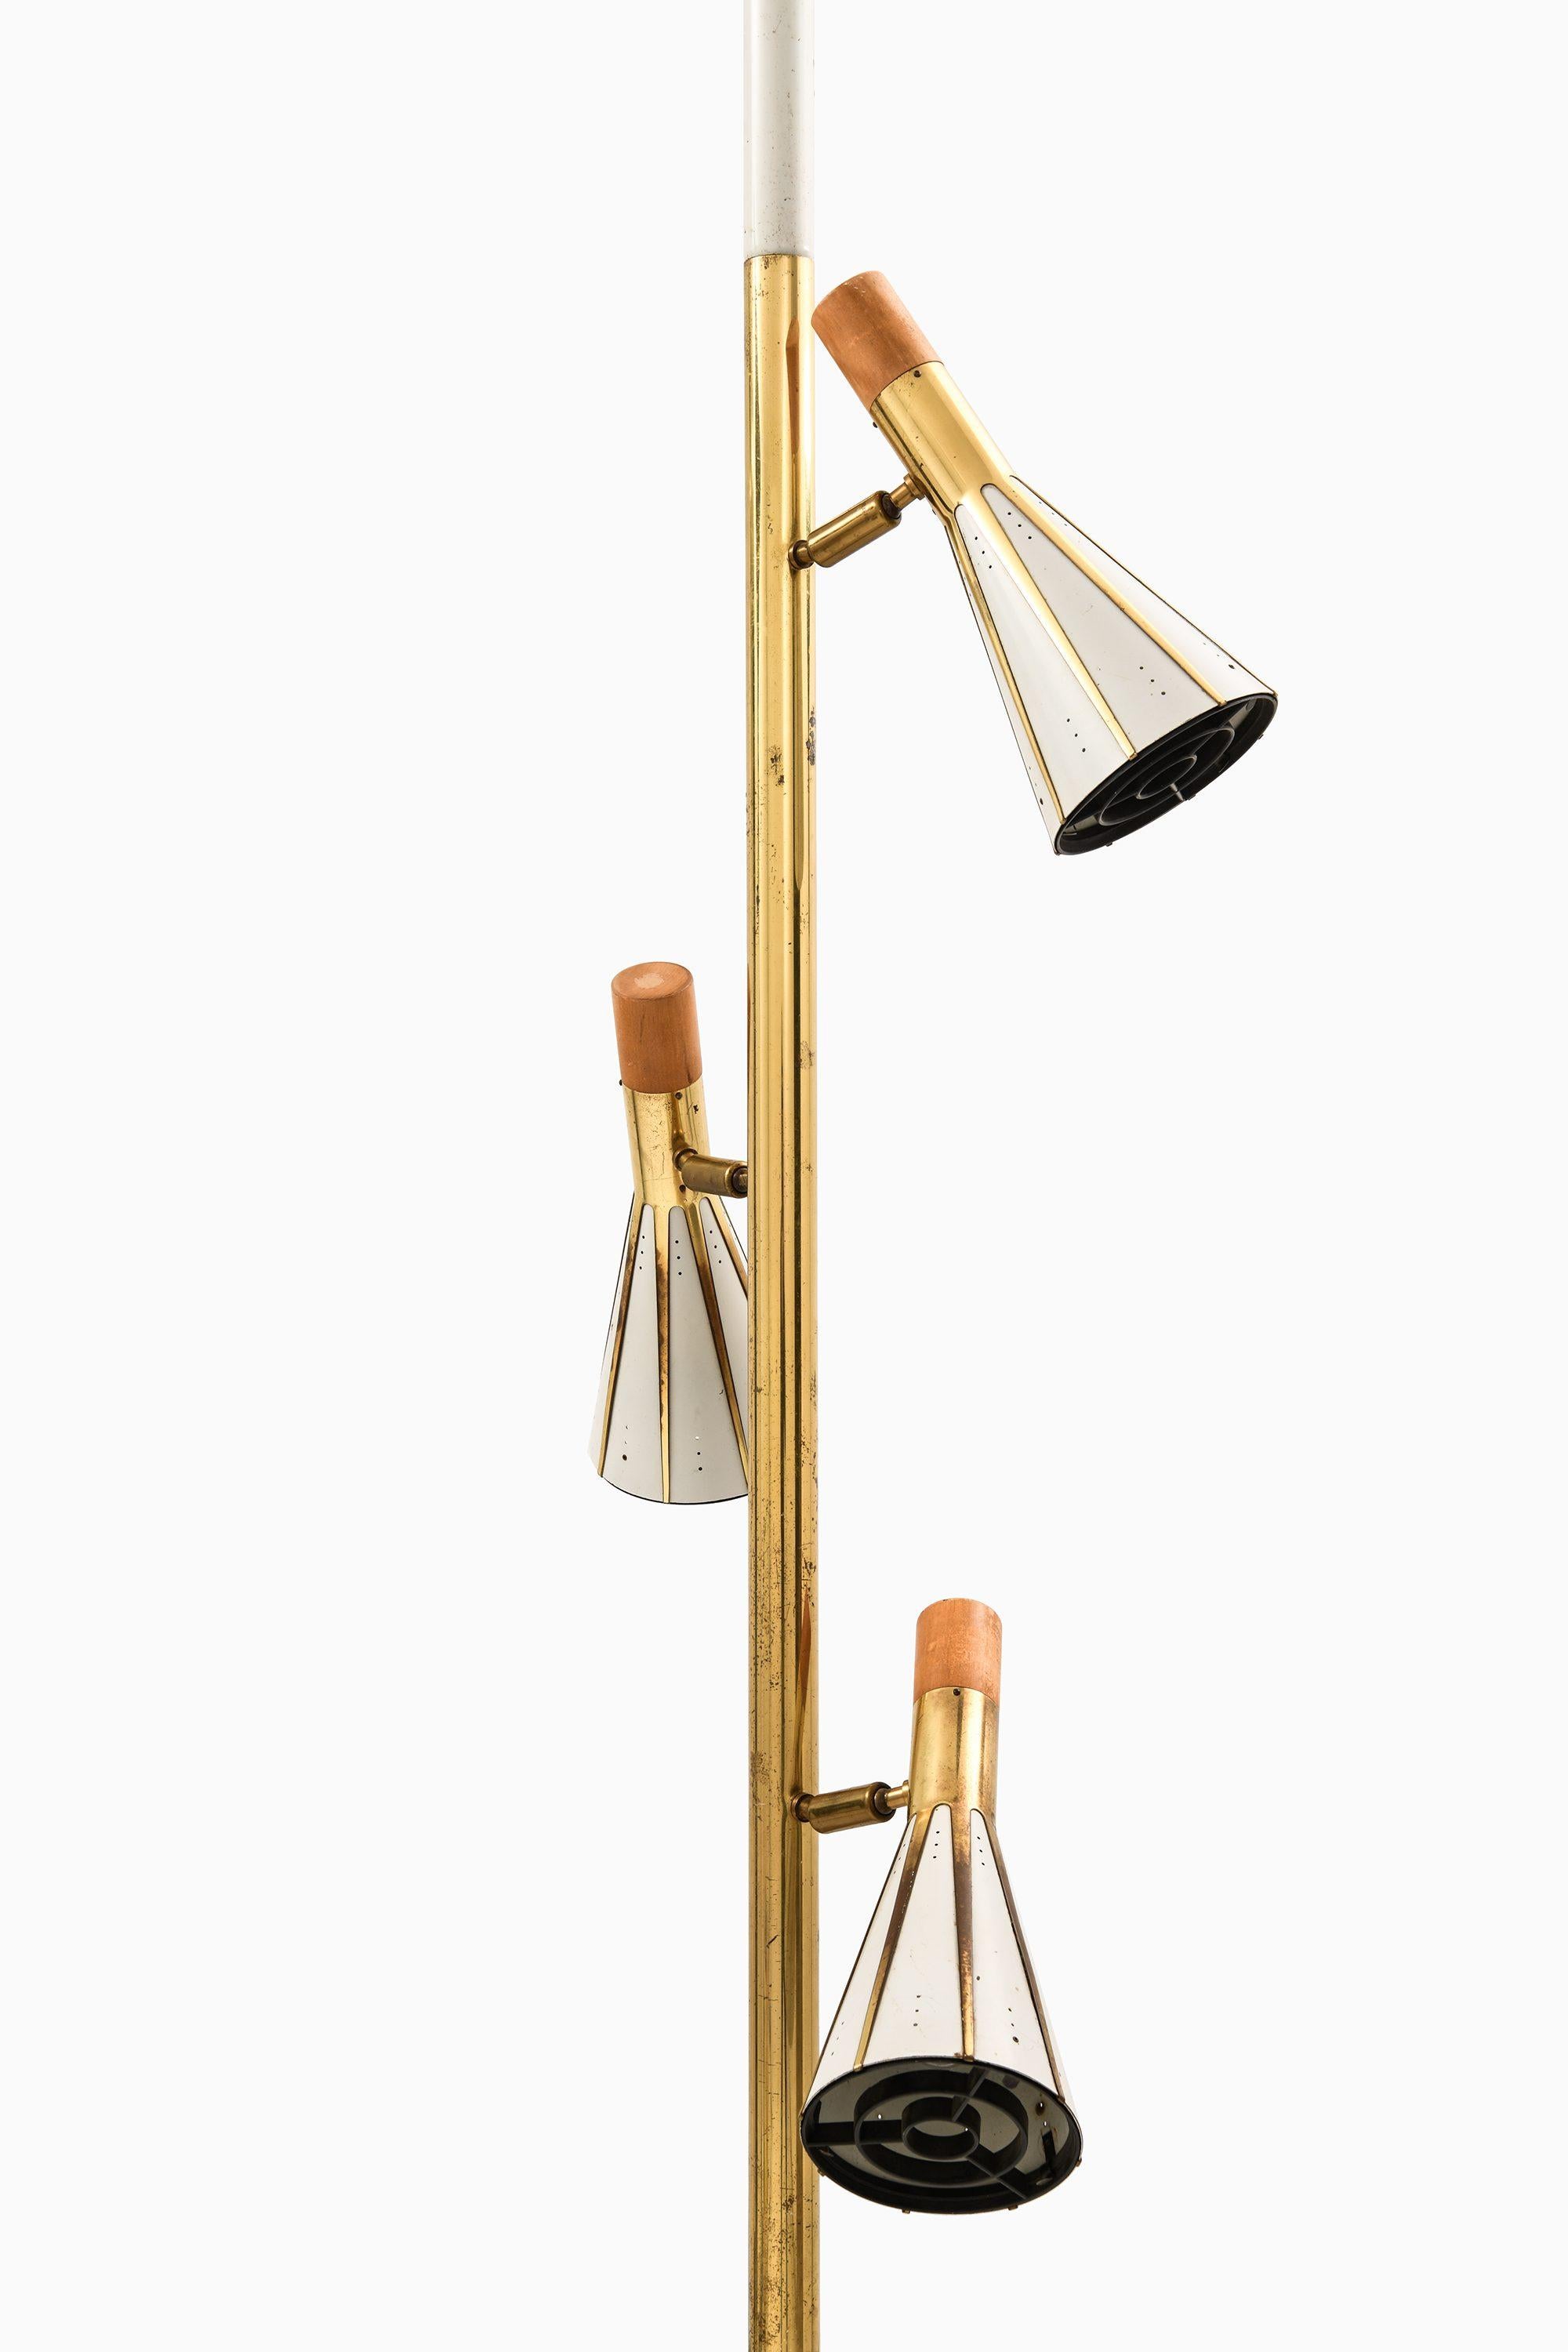 Rare Floor / Pole Lamp in Brass and White Lacquered Metal, 1960’s

Additional Information:
Material: Brass and white lacquered metal
Style: Mid century, Scandinavian
Produced by Stiffel in USA
Dimensions (W x D x H): 50 x 50 x 210-240 cm
Condition: